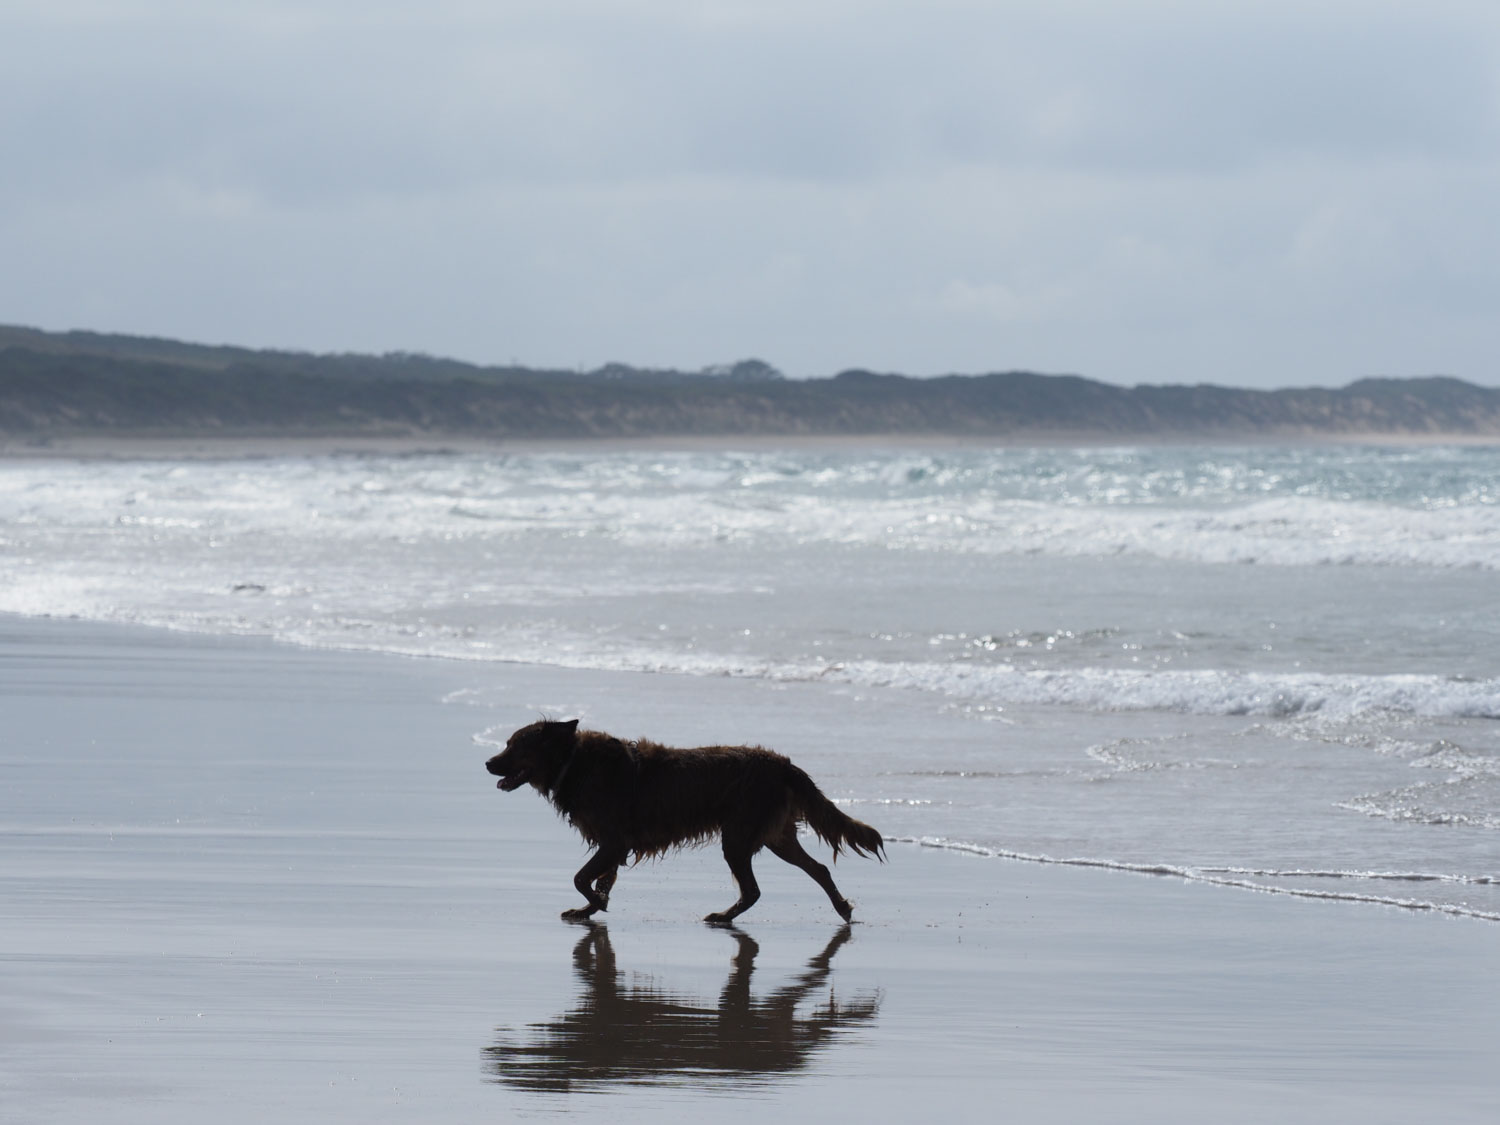 A dog stands on the Urquhart Bluff beach which curves around behind